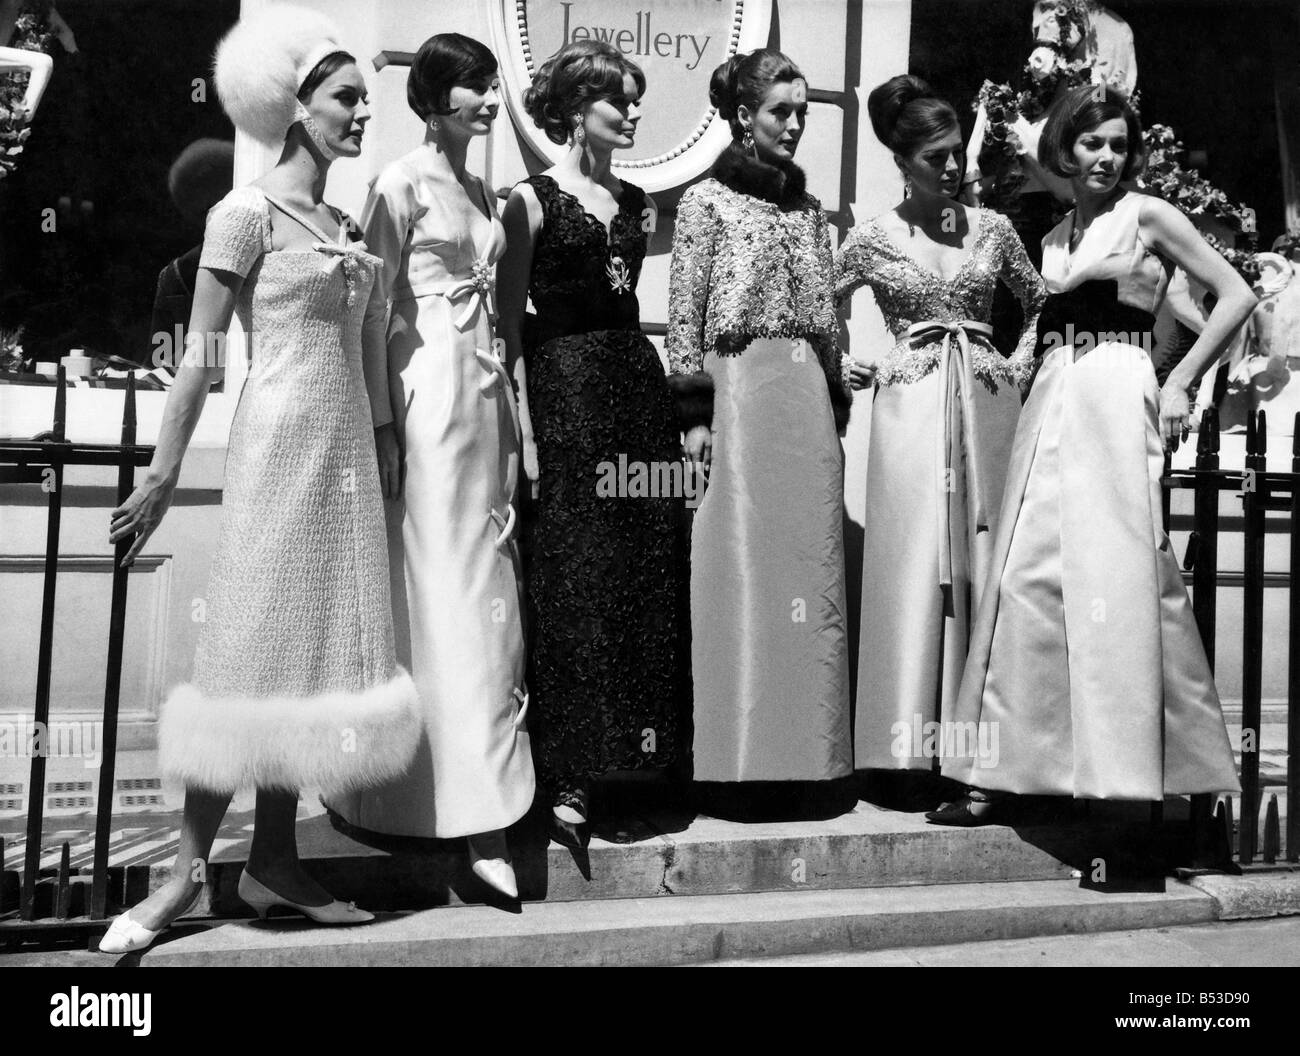 Fashion 1960s.;Women gather in a group on the steps in street. Long ...